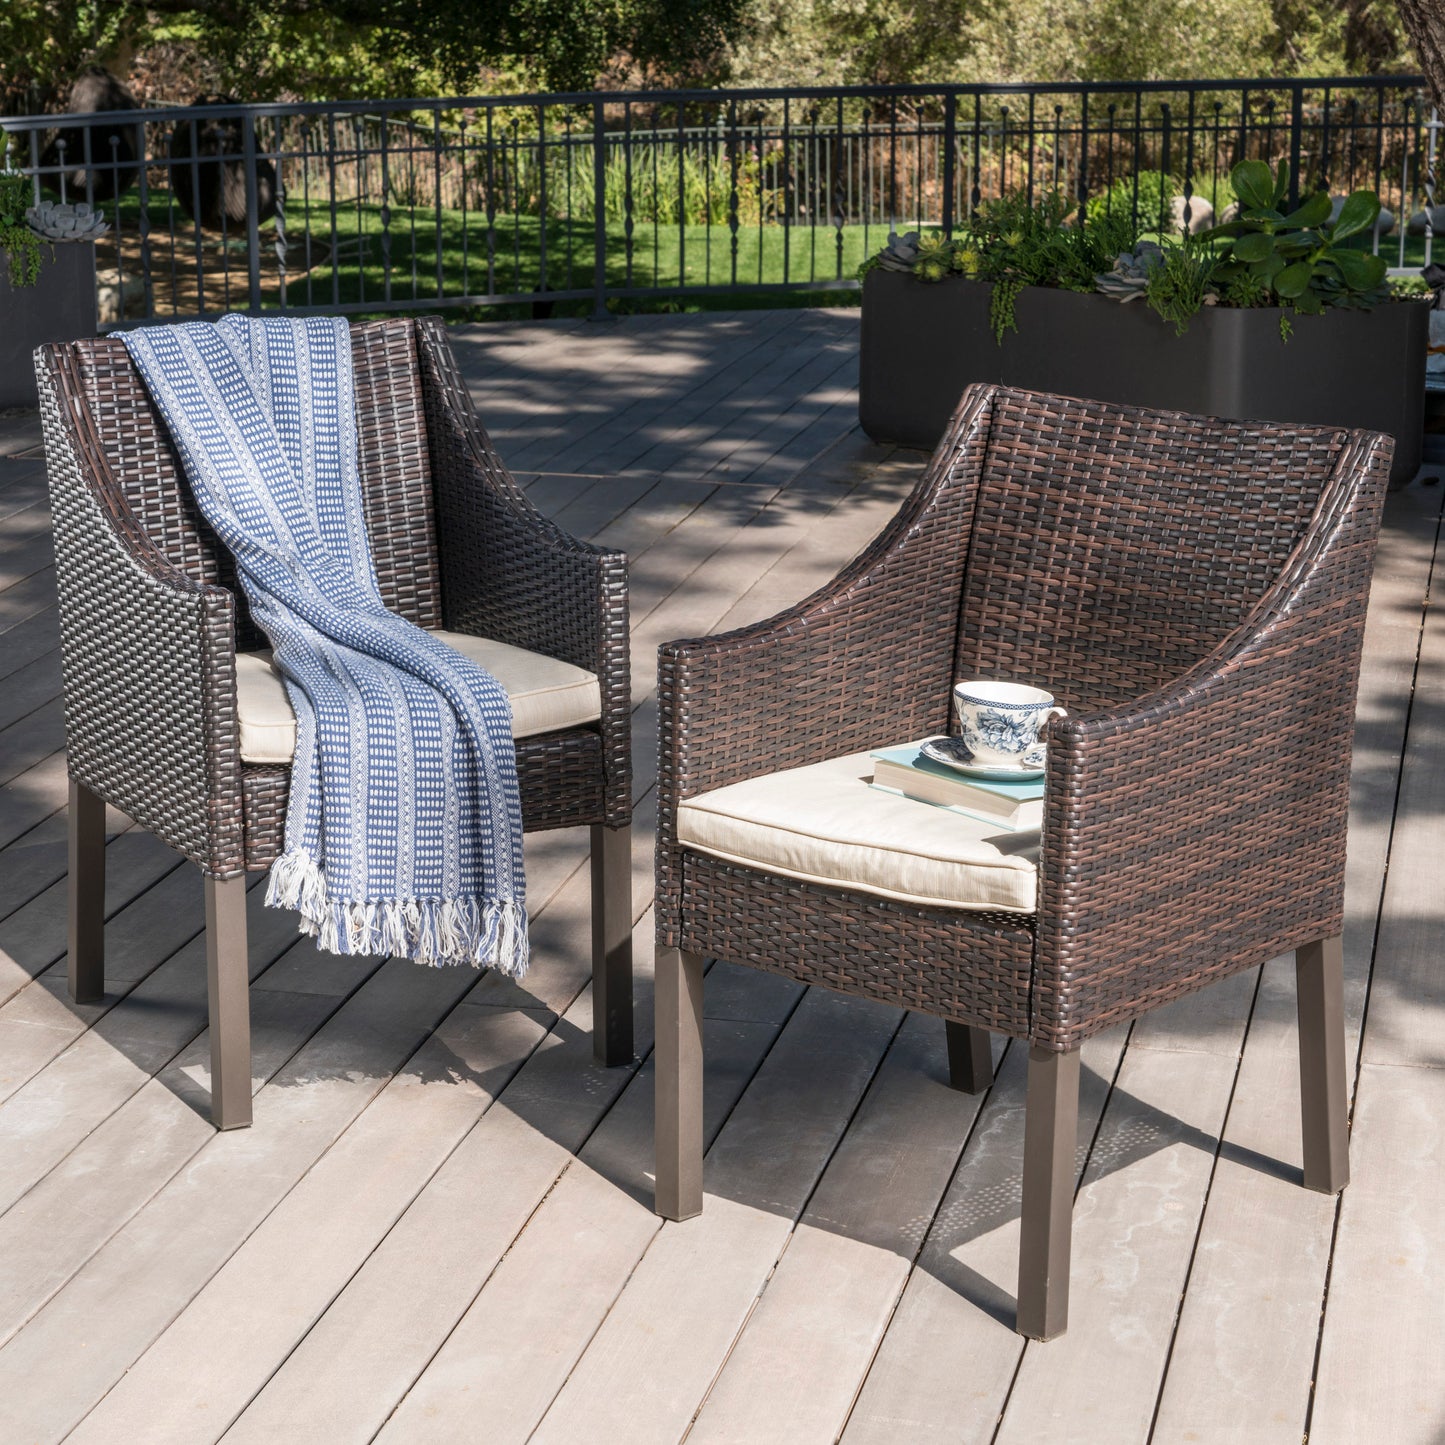 Antioch Outdoor Wicker Dining Chairs with Water Resistant Cushions (Set of 2)